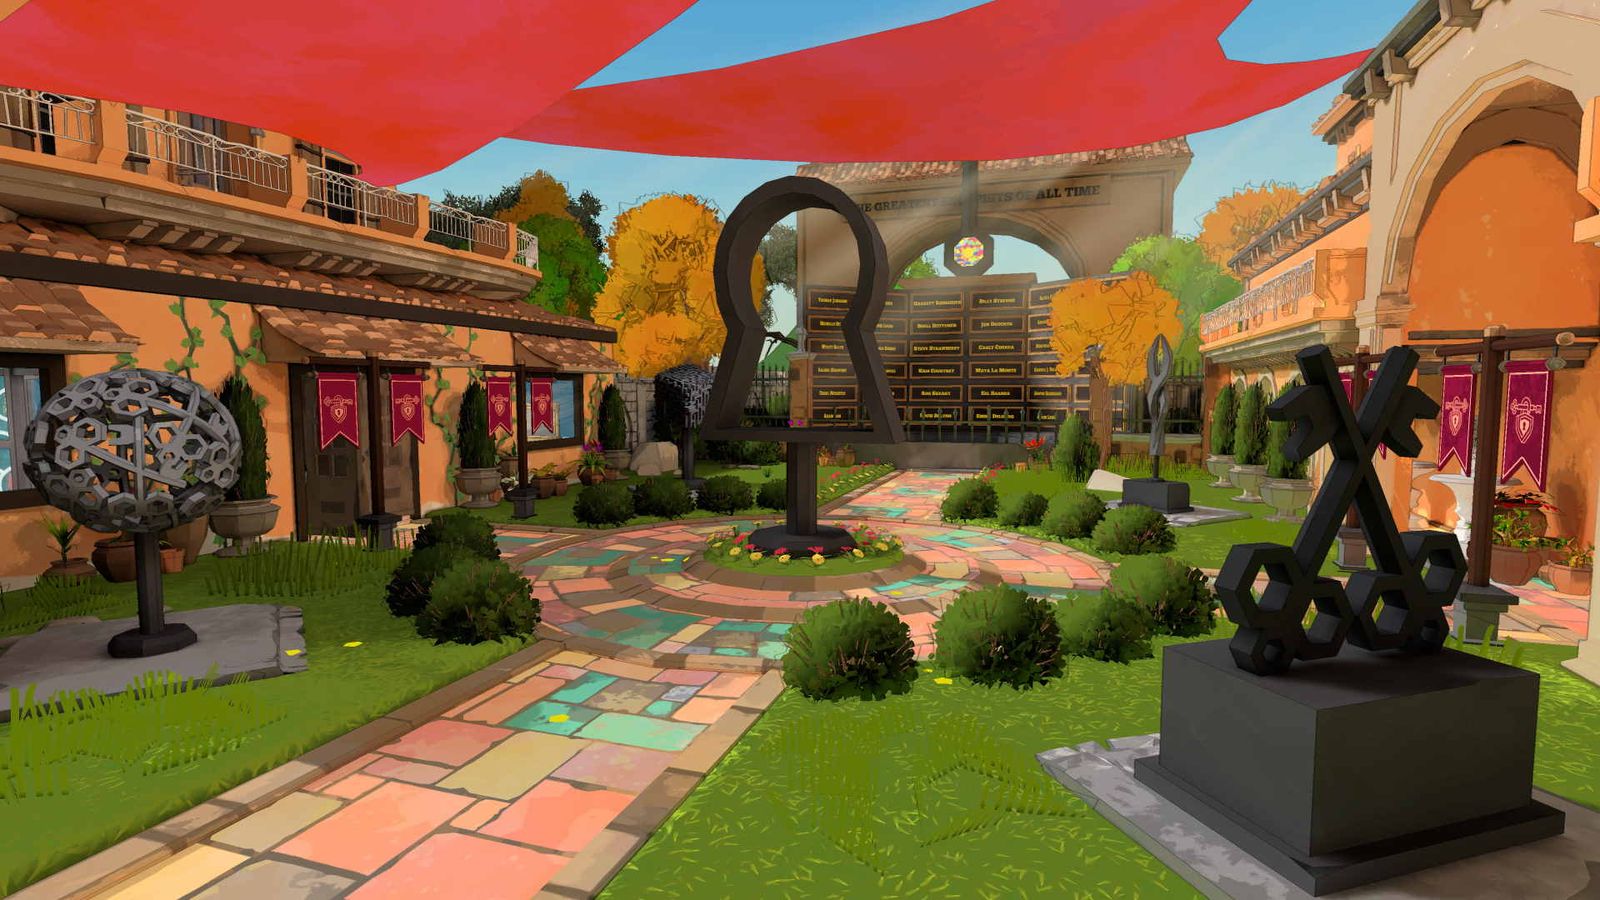 A screenshot of the garden in Escape Academy, featuring multiple sculptures including a giant lock, a cube, and some crossed keys.